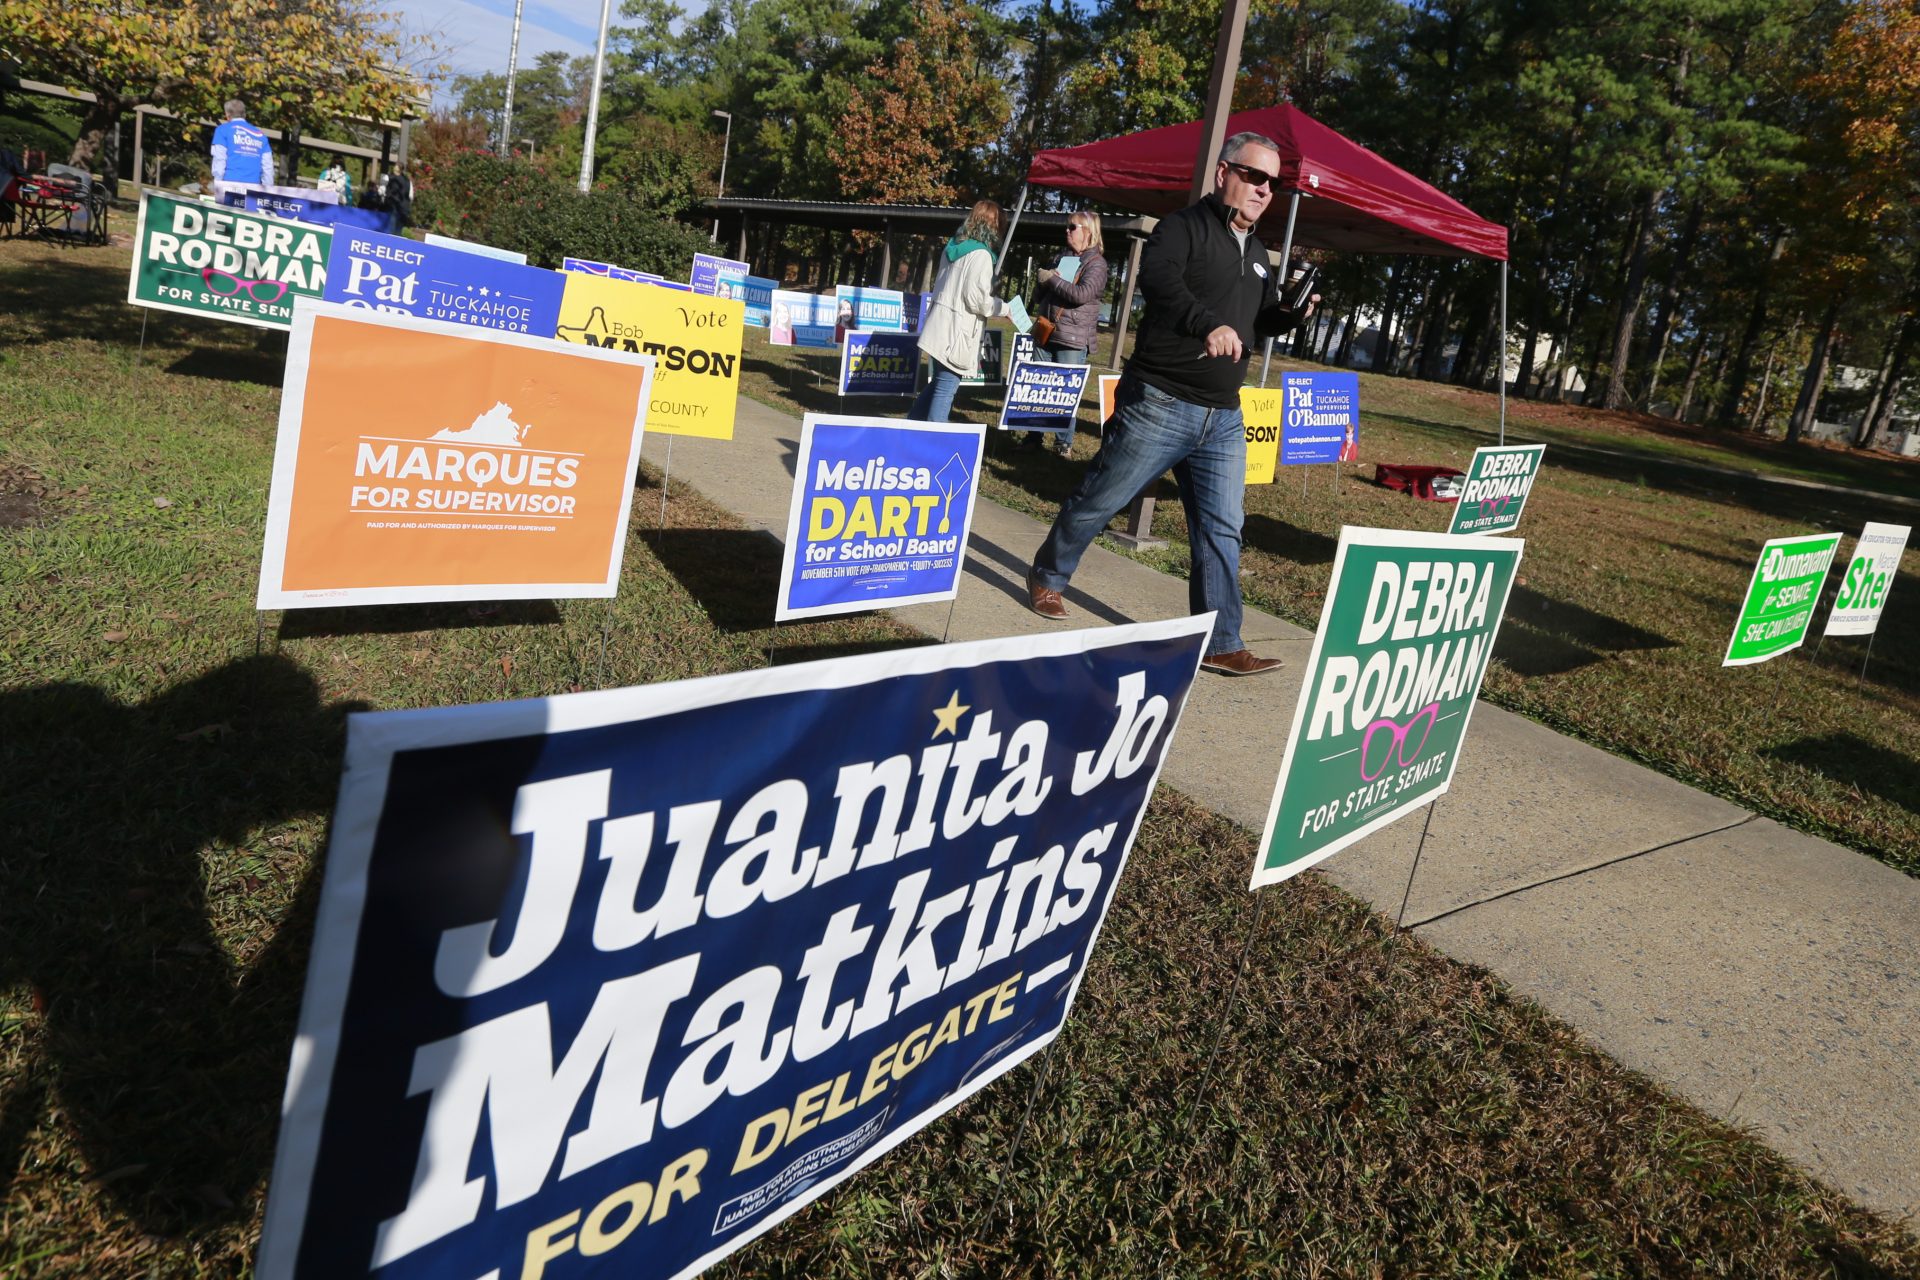 Voters walk through a sea of campaign signs at a polling station in Richmond, Va., Tuesday, Nov. 5, 2019. All seats in the Virginia House of Delegates and State senate are up for election.